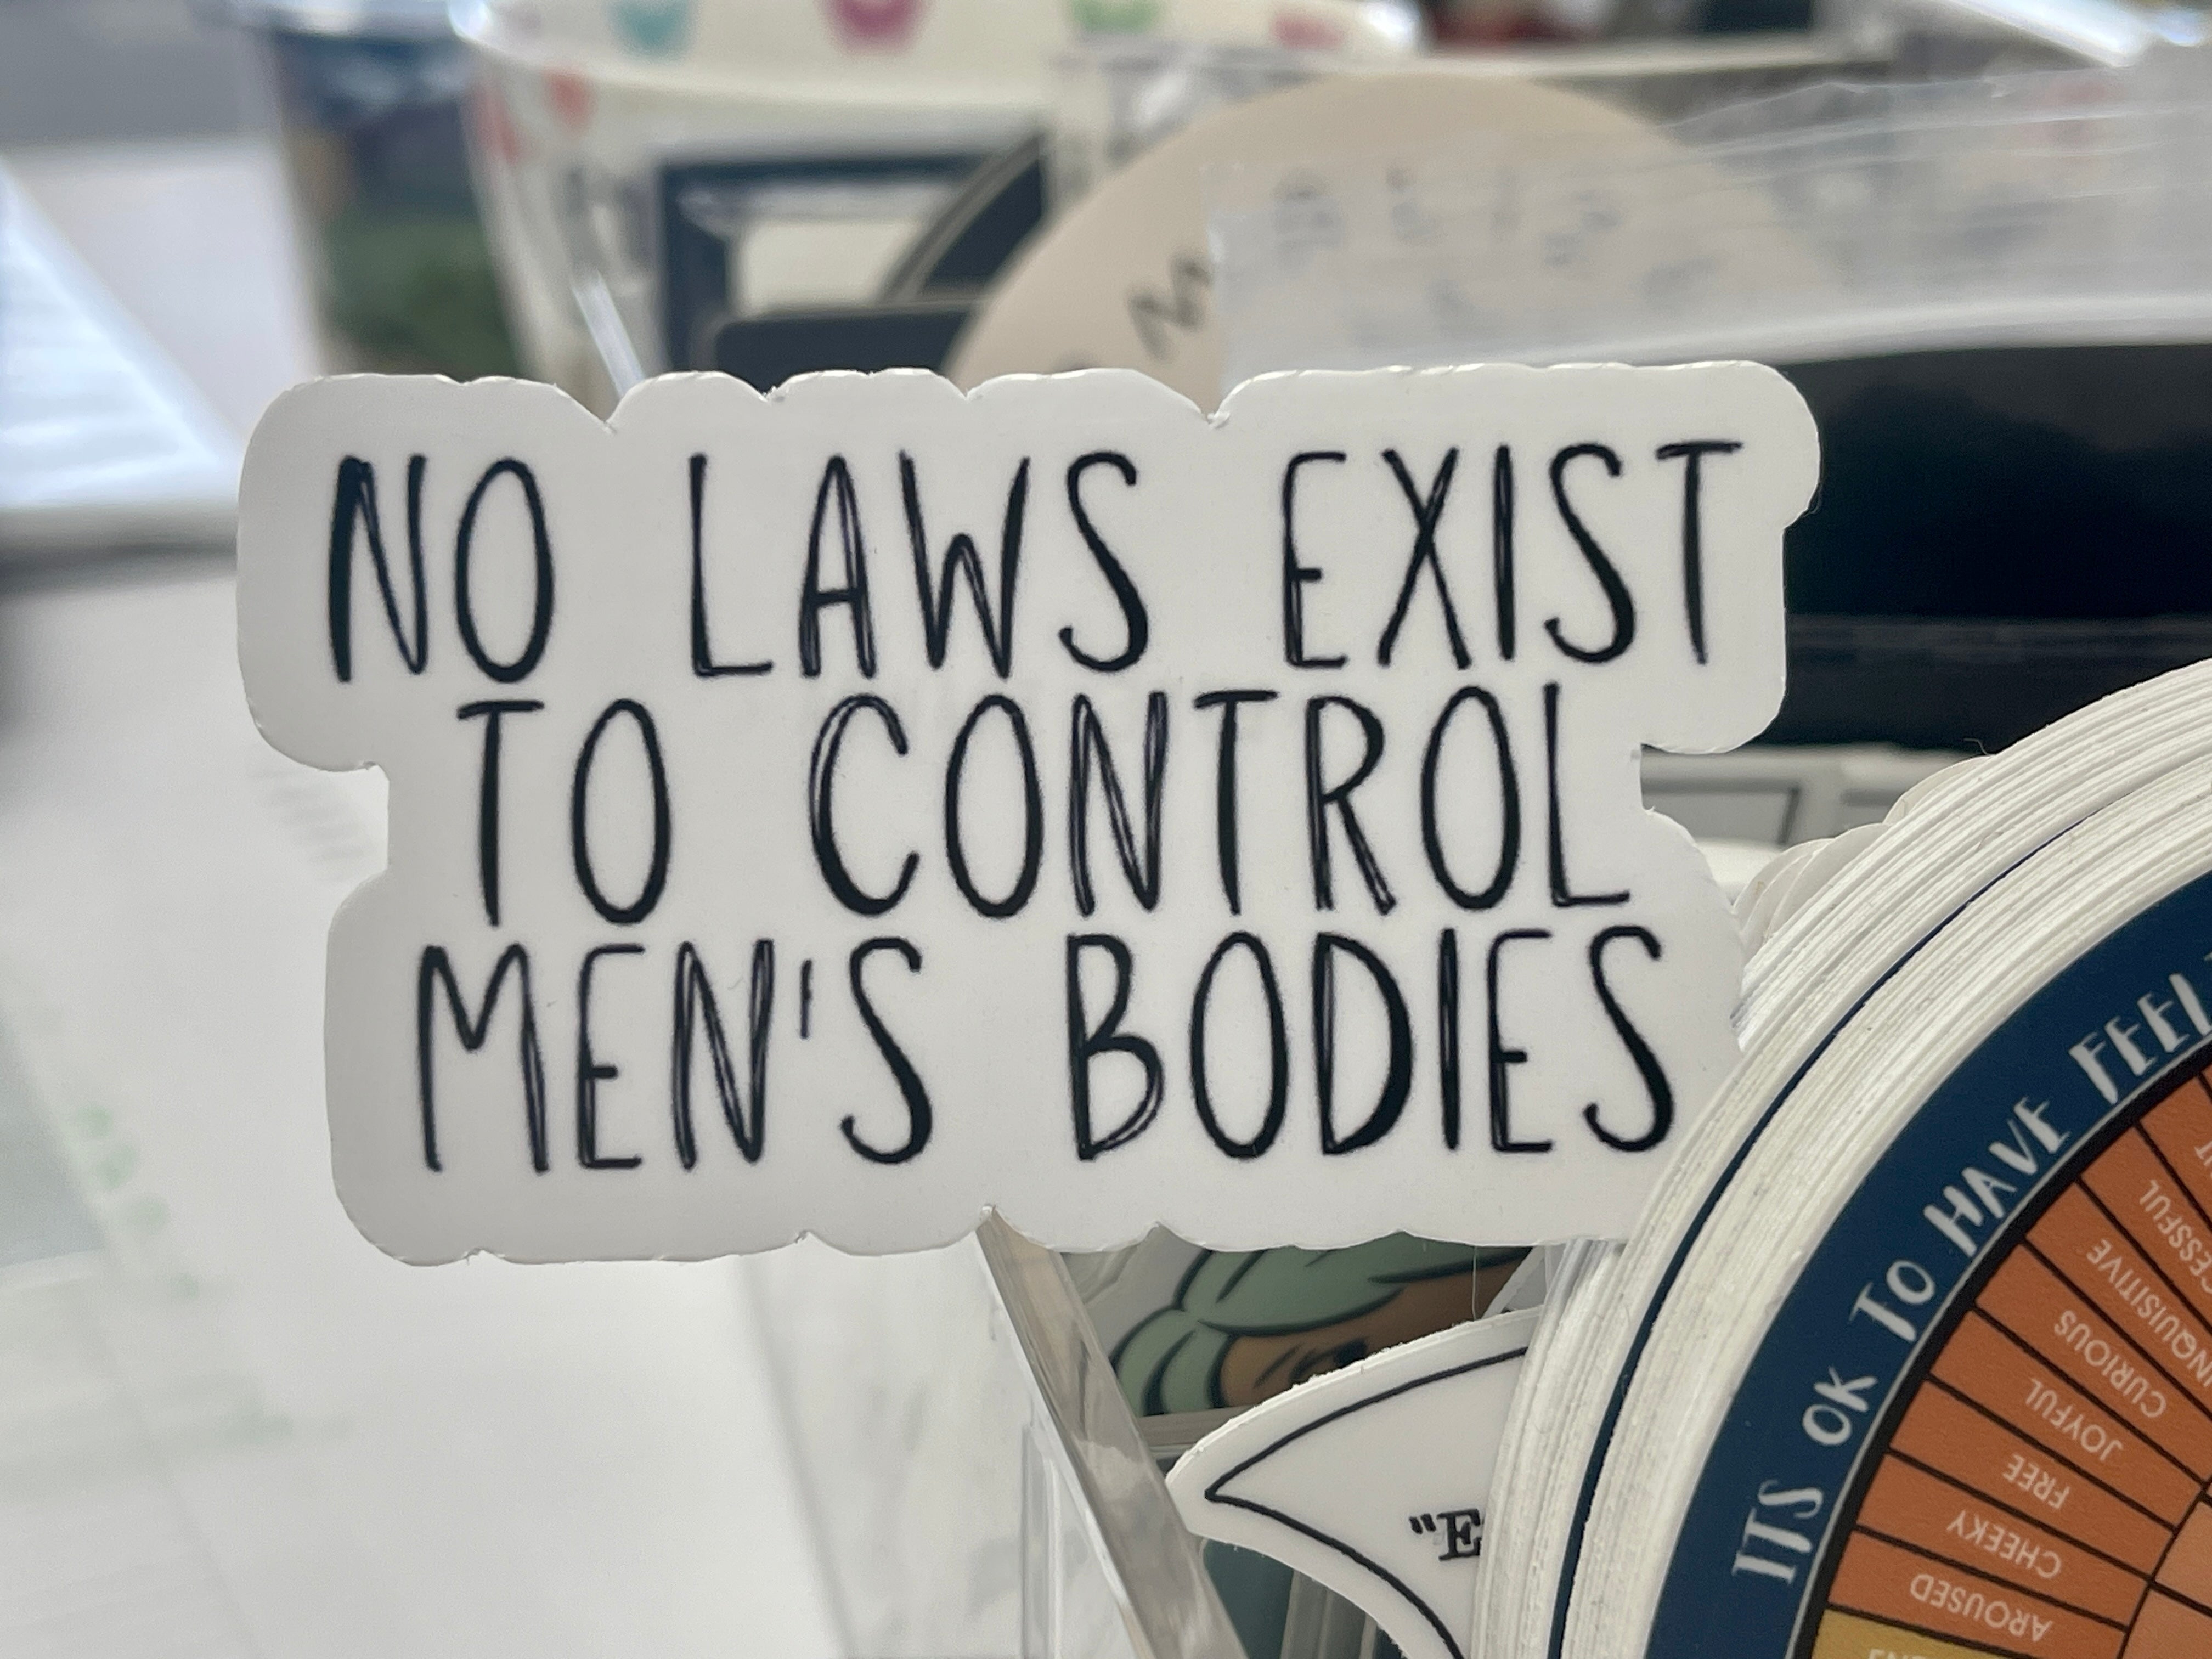 No laws exist to control mens bodies